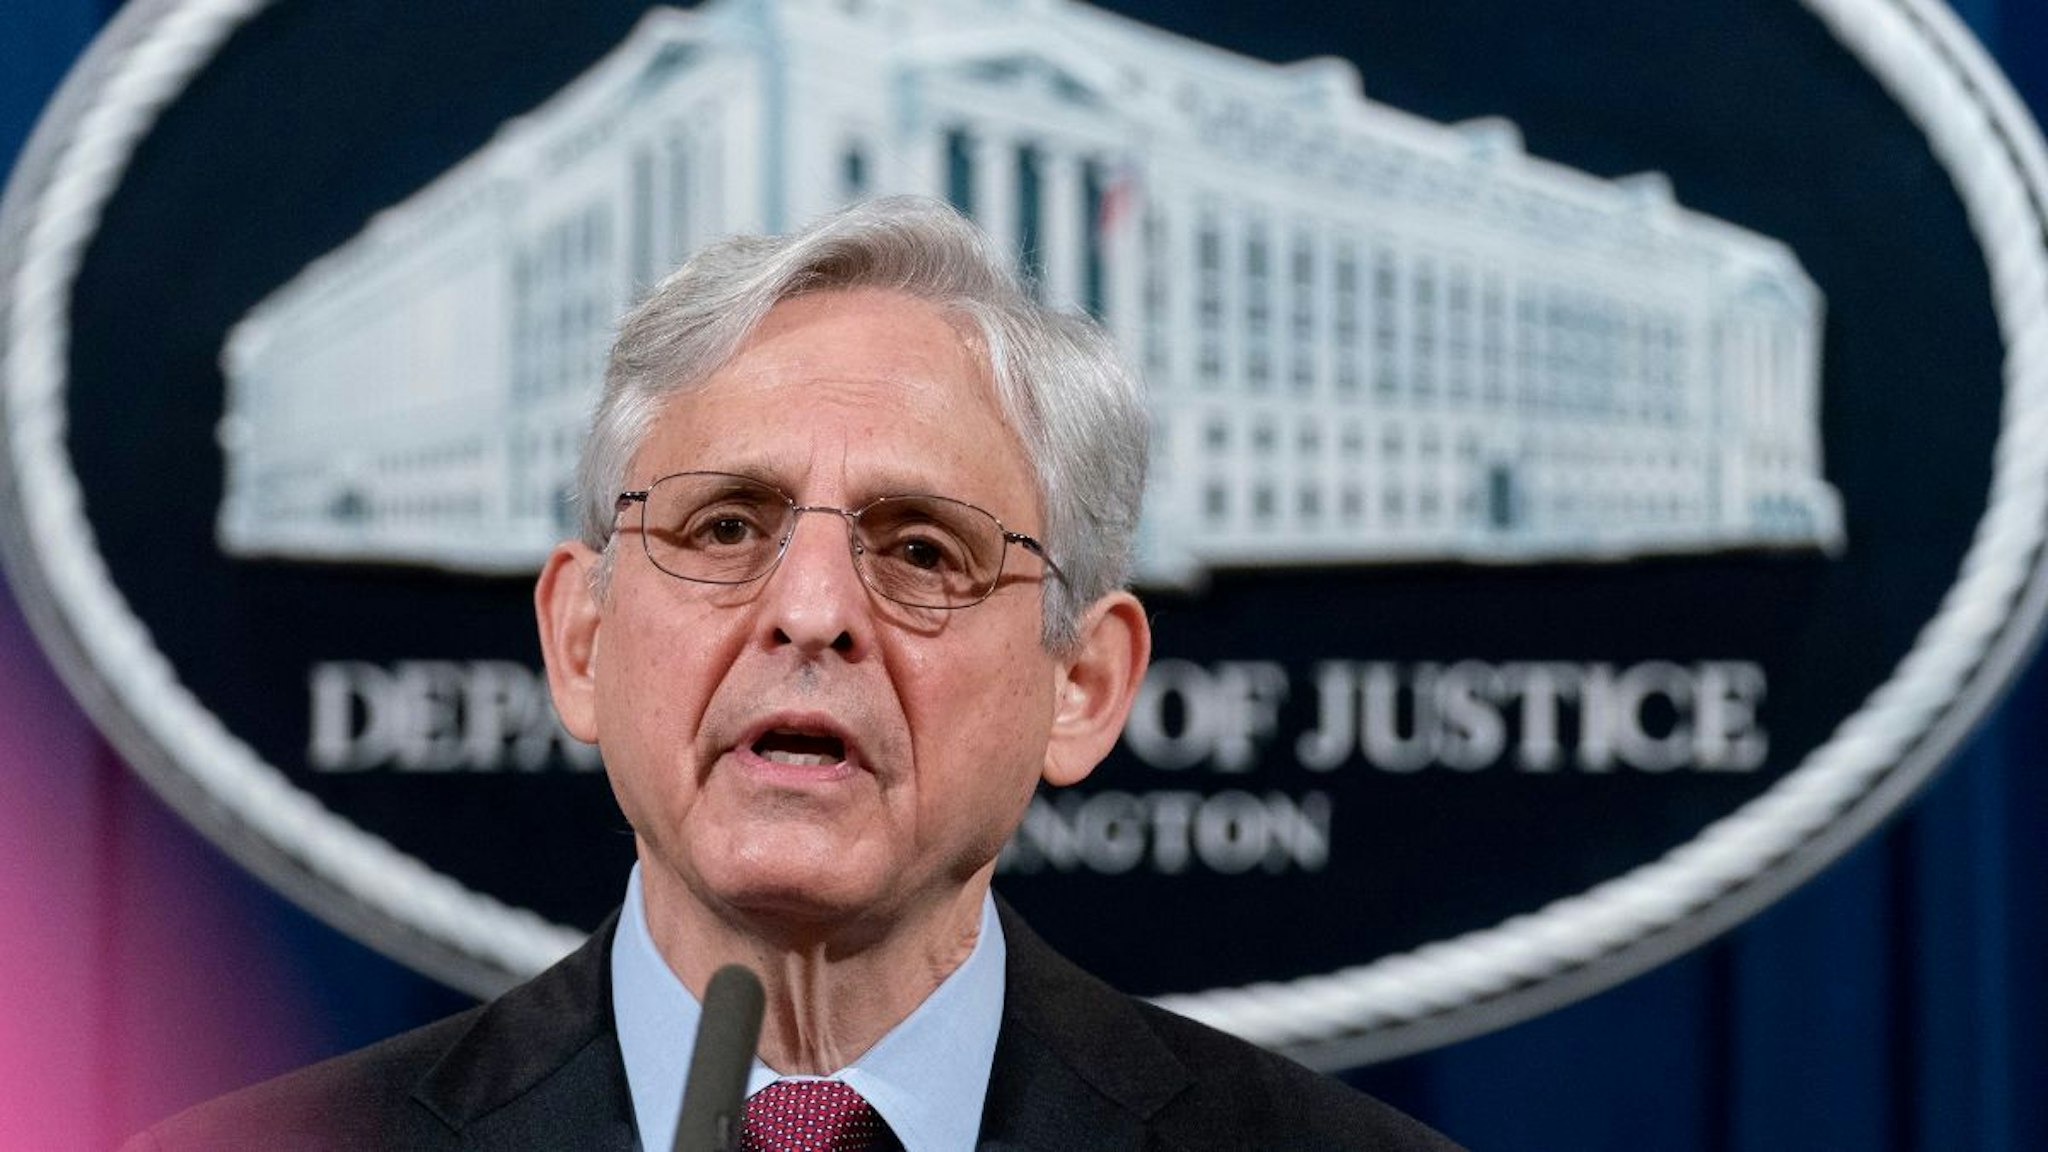 Attorney General Merrick Garland speaks about a jury's verdict in the case against former Minneapolis Police Officer Derek Chauvin in the death of George Floyd, at the Department of Justice on April 21, 2021 in Washington, DC.